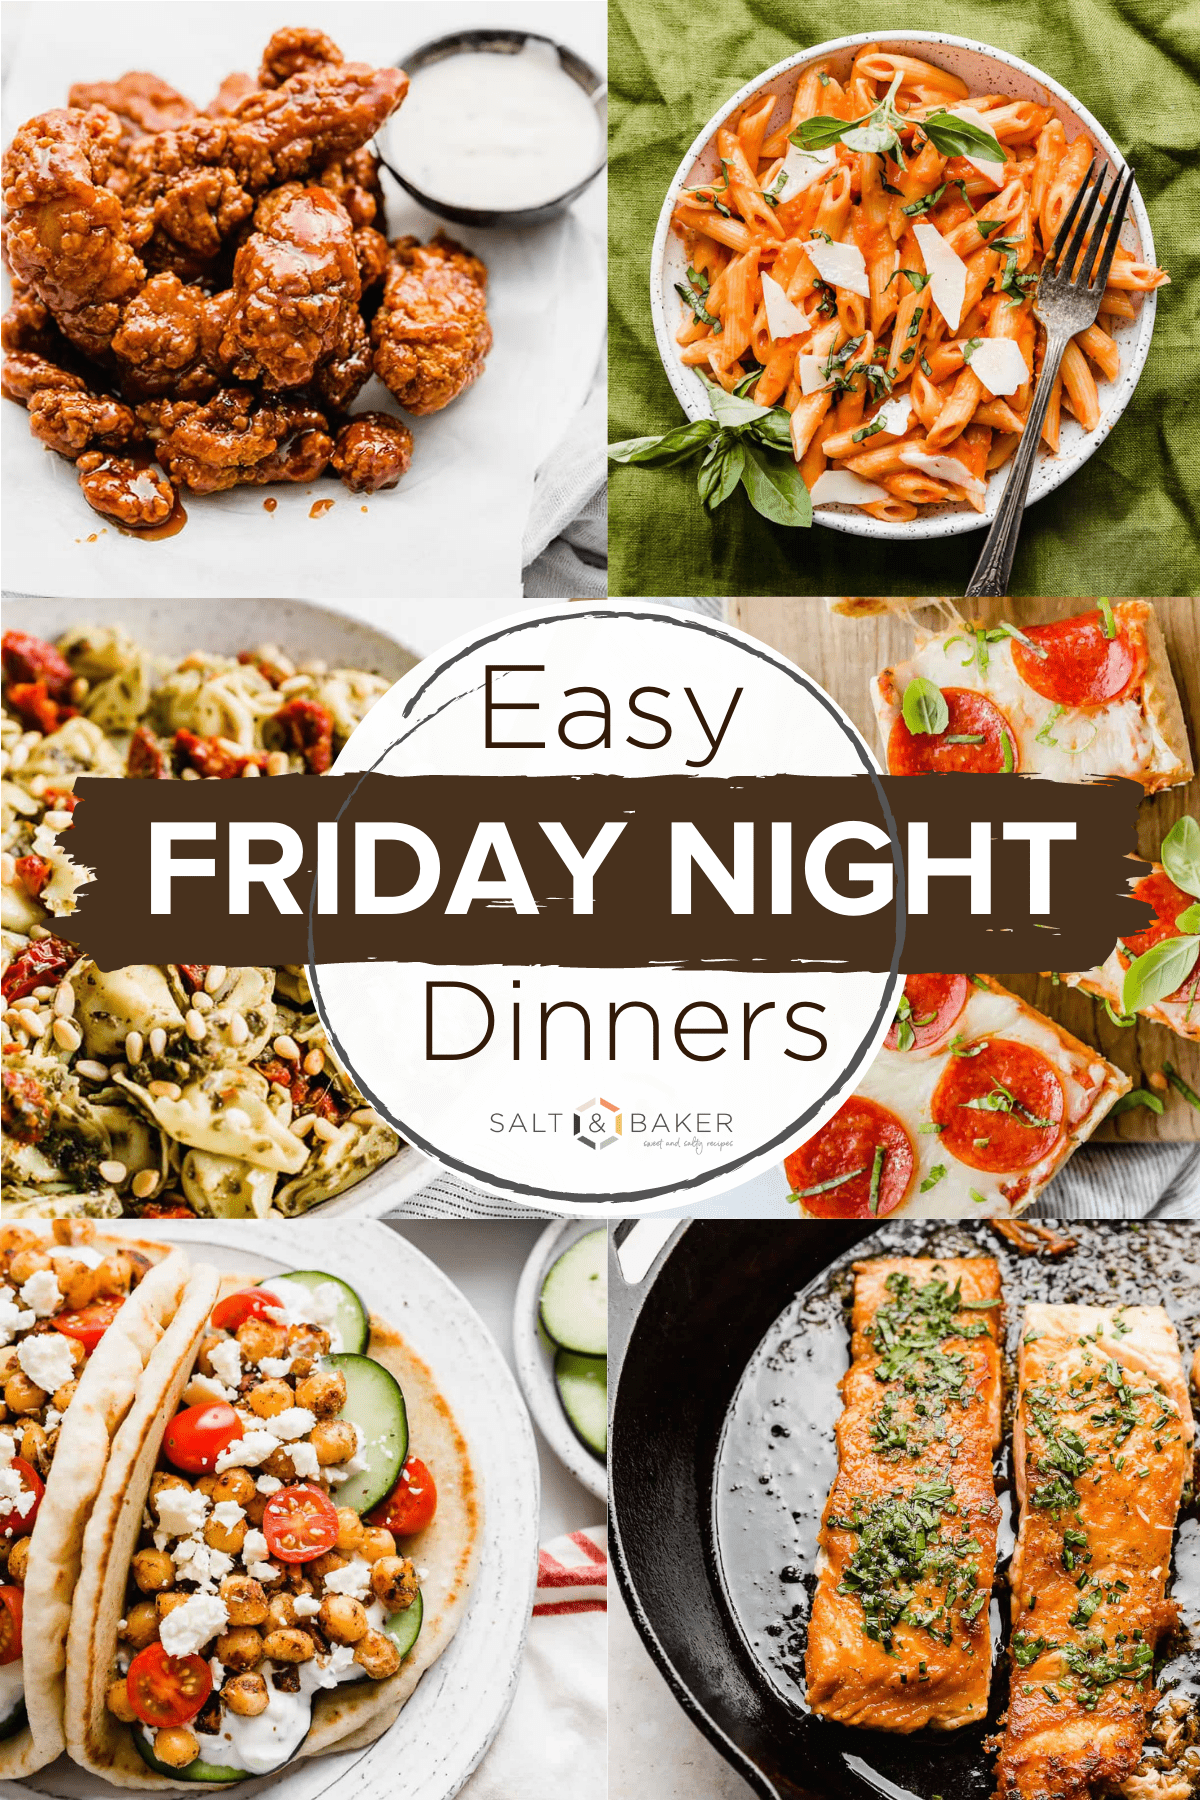 Easy Friday night dinner ideas are shown in a collage of images. 